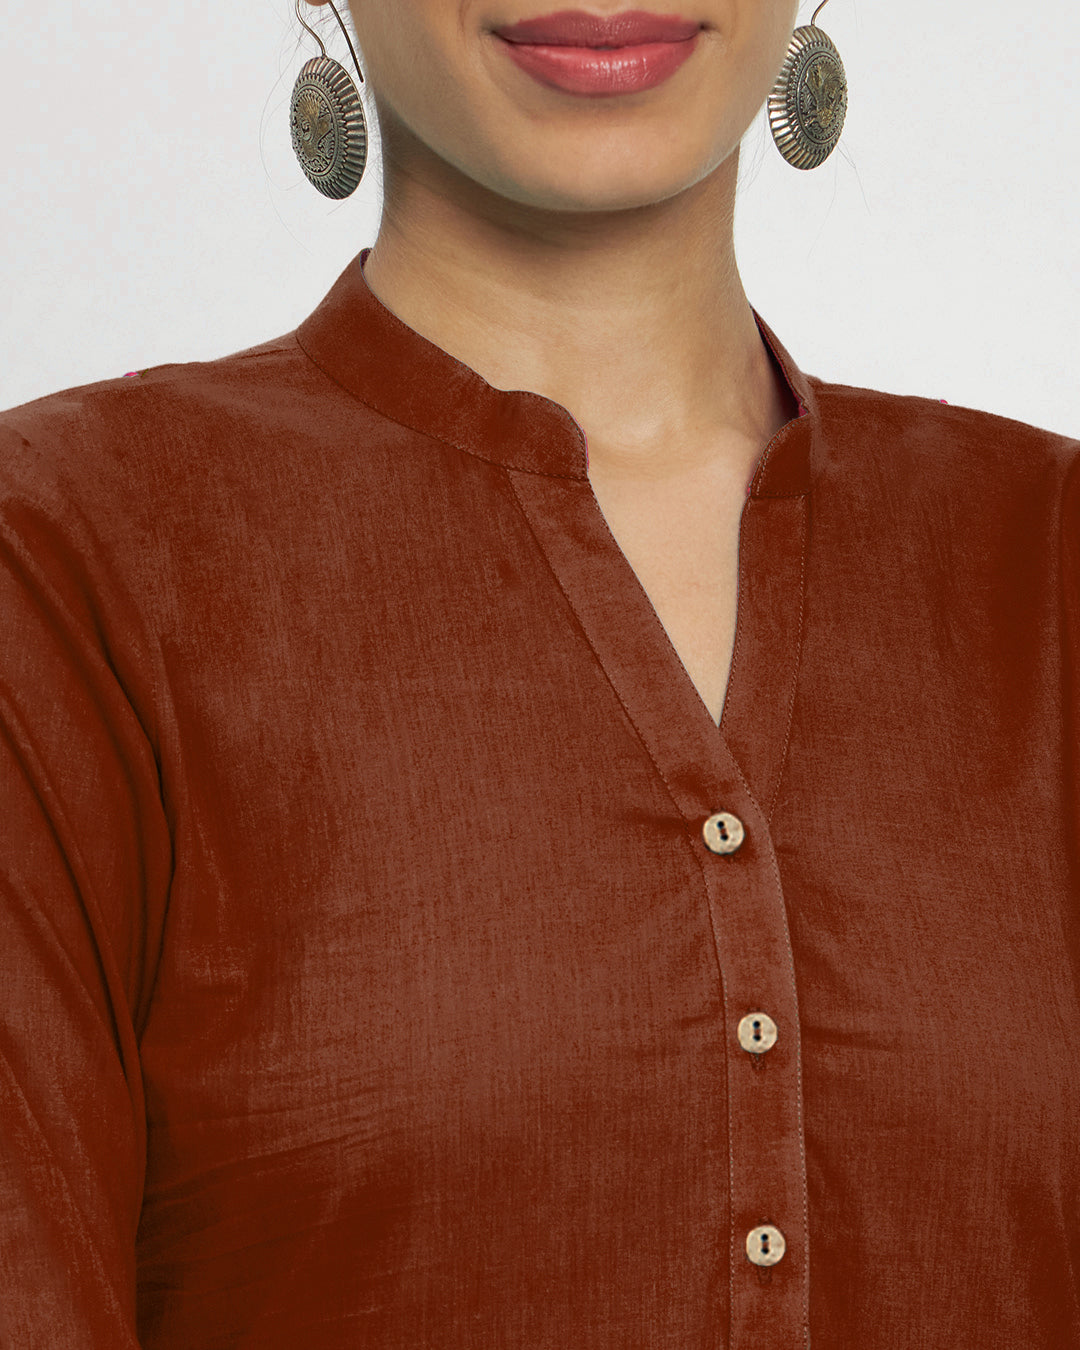 Russet Red Flattering High-Low Kurta (Without Bottoms)